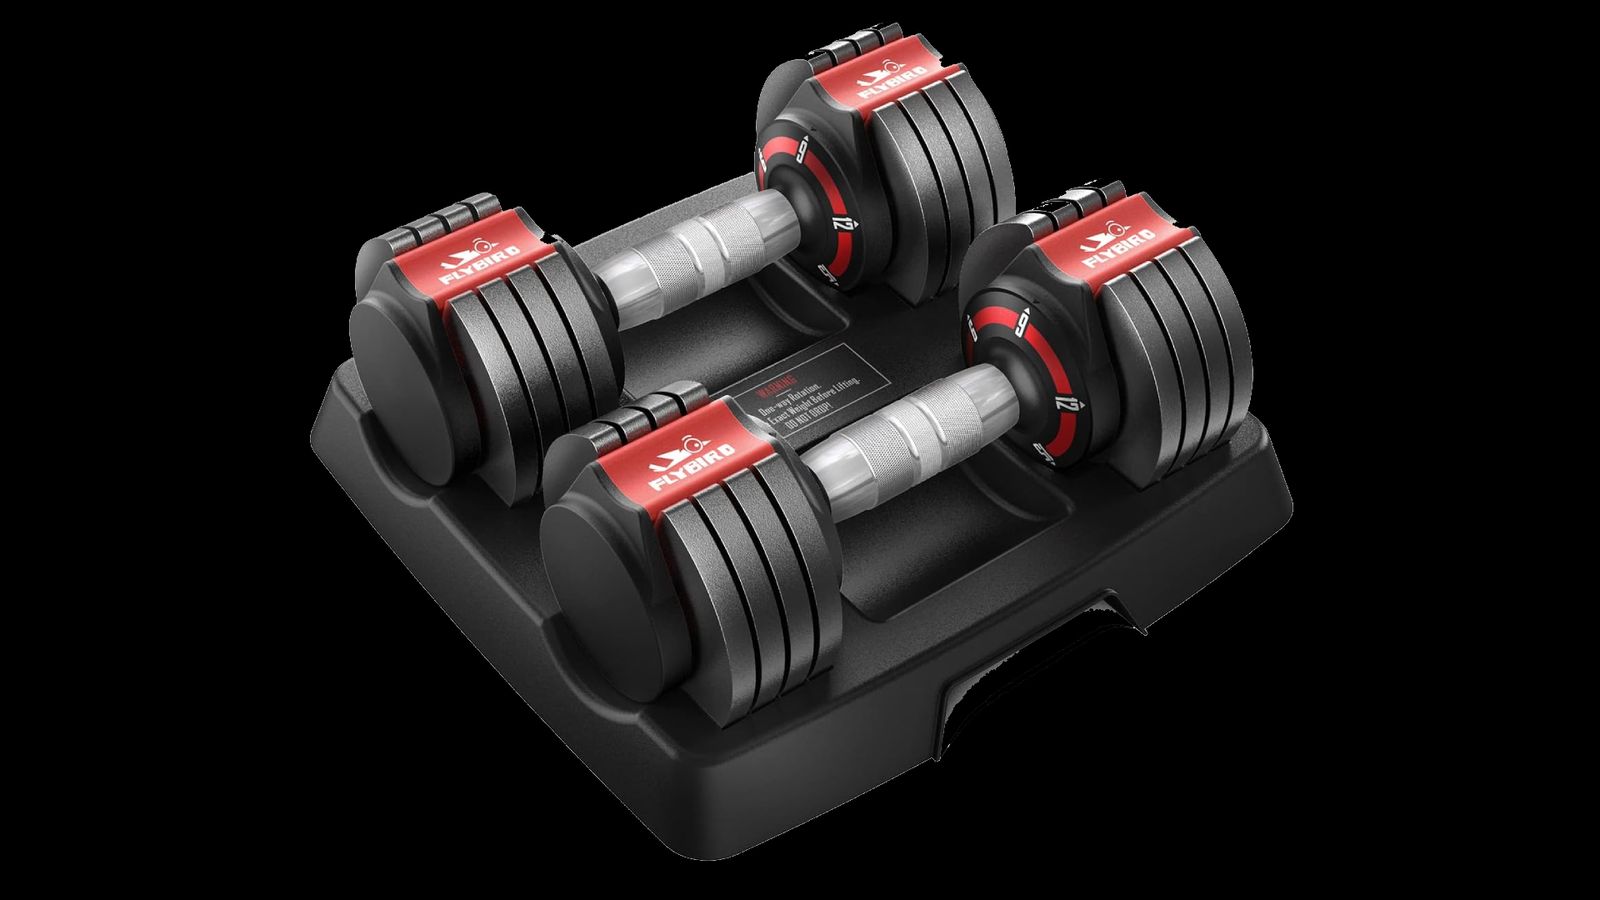 Flybird Adjustable Dumbbells product image of a black and red set in a black case.